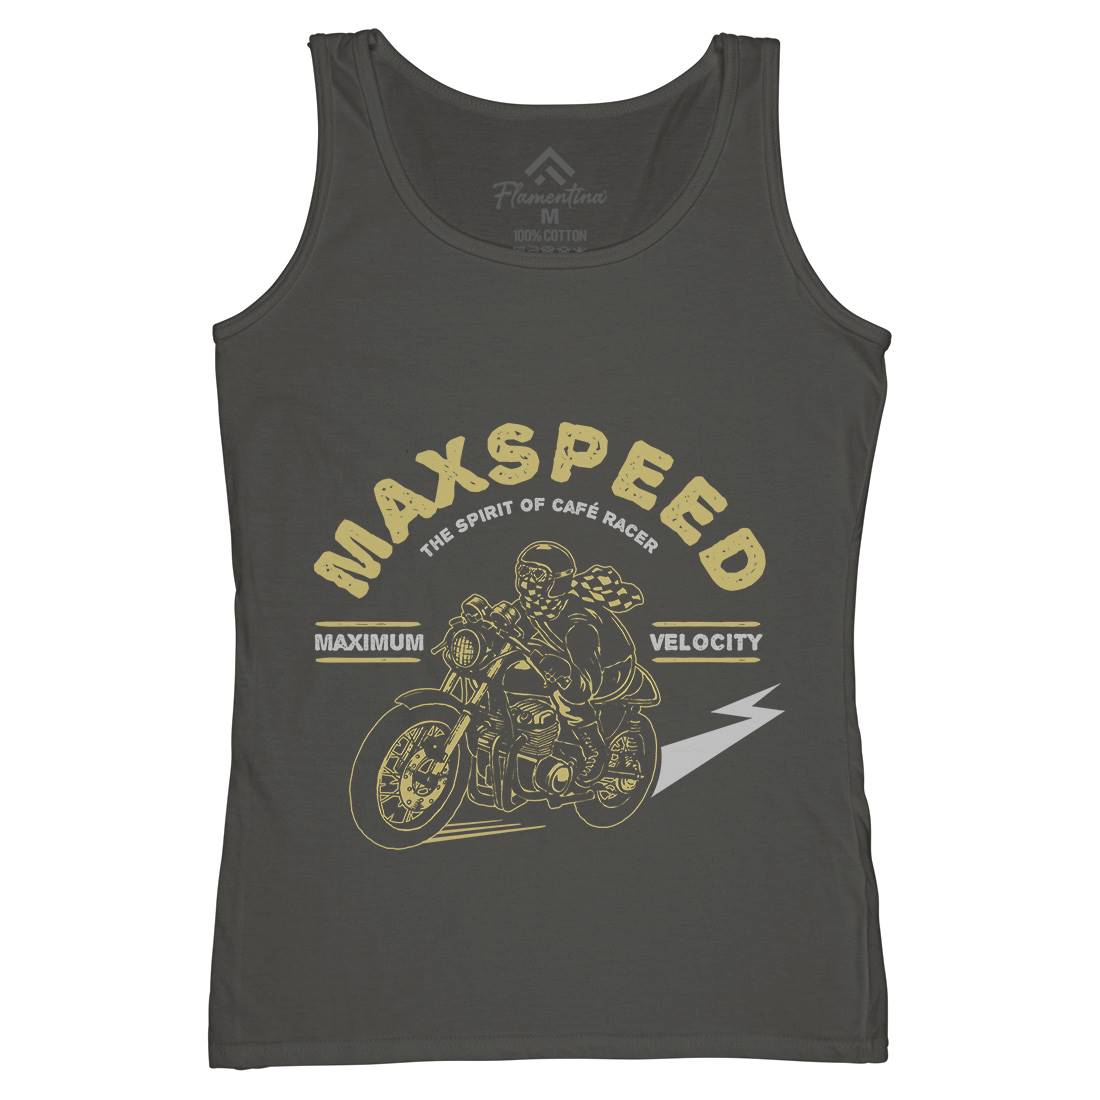 Max Speed Womens Organic Tank Top Vest Motorcycles A343